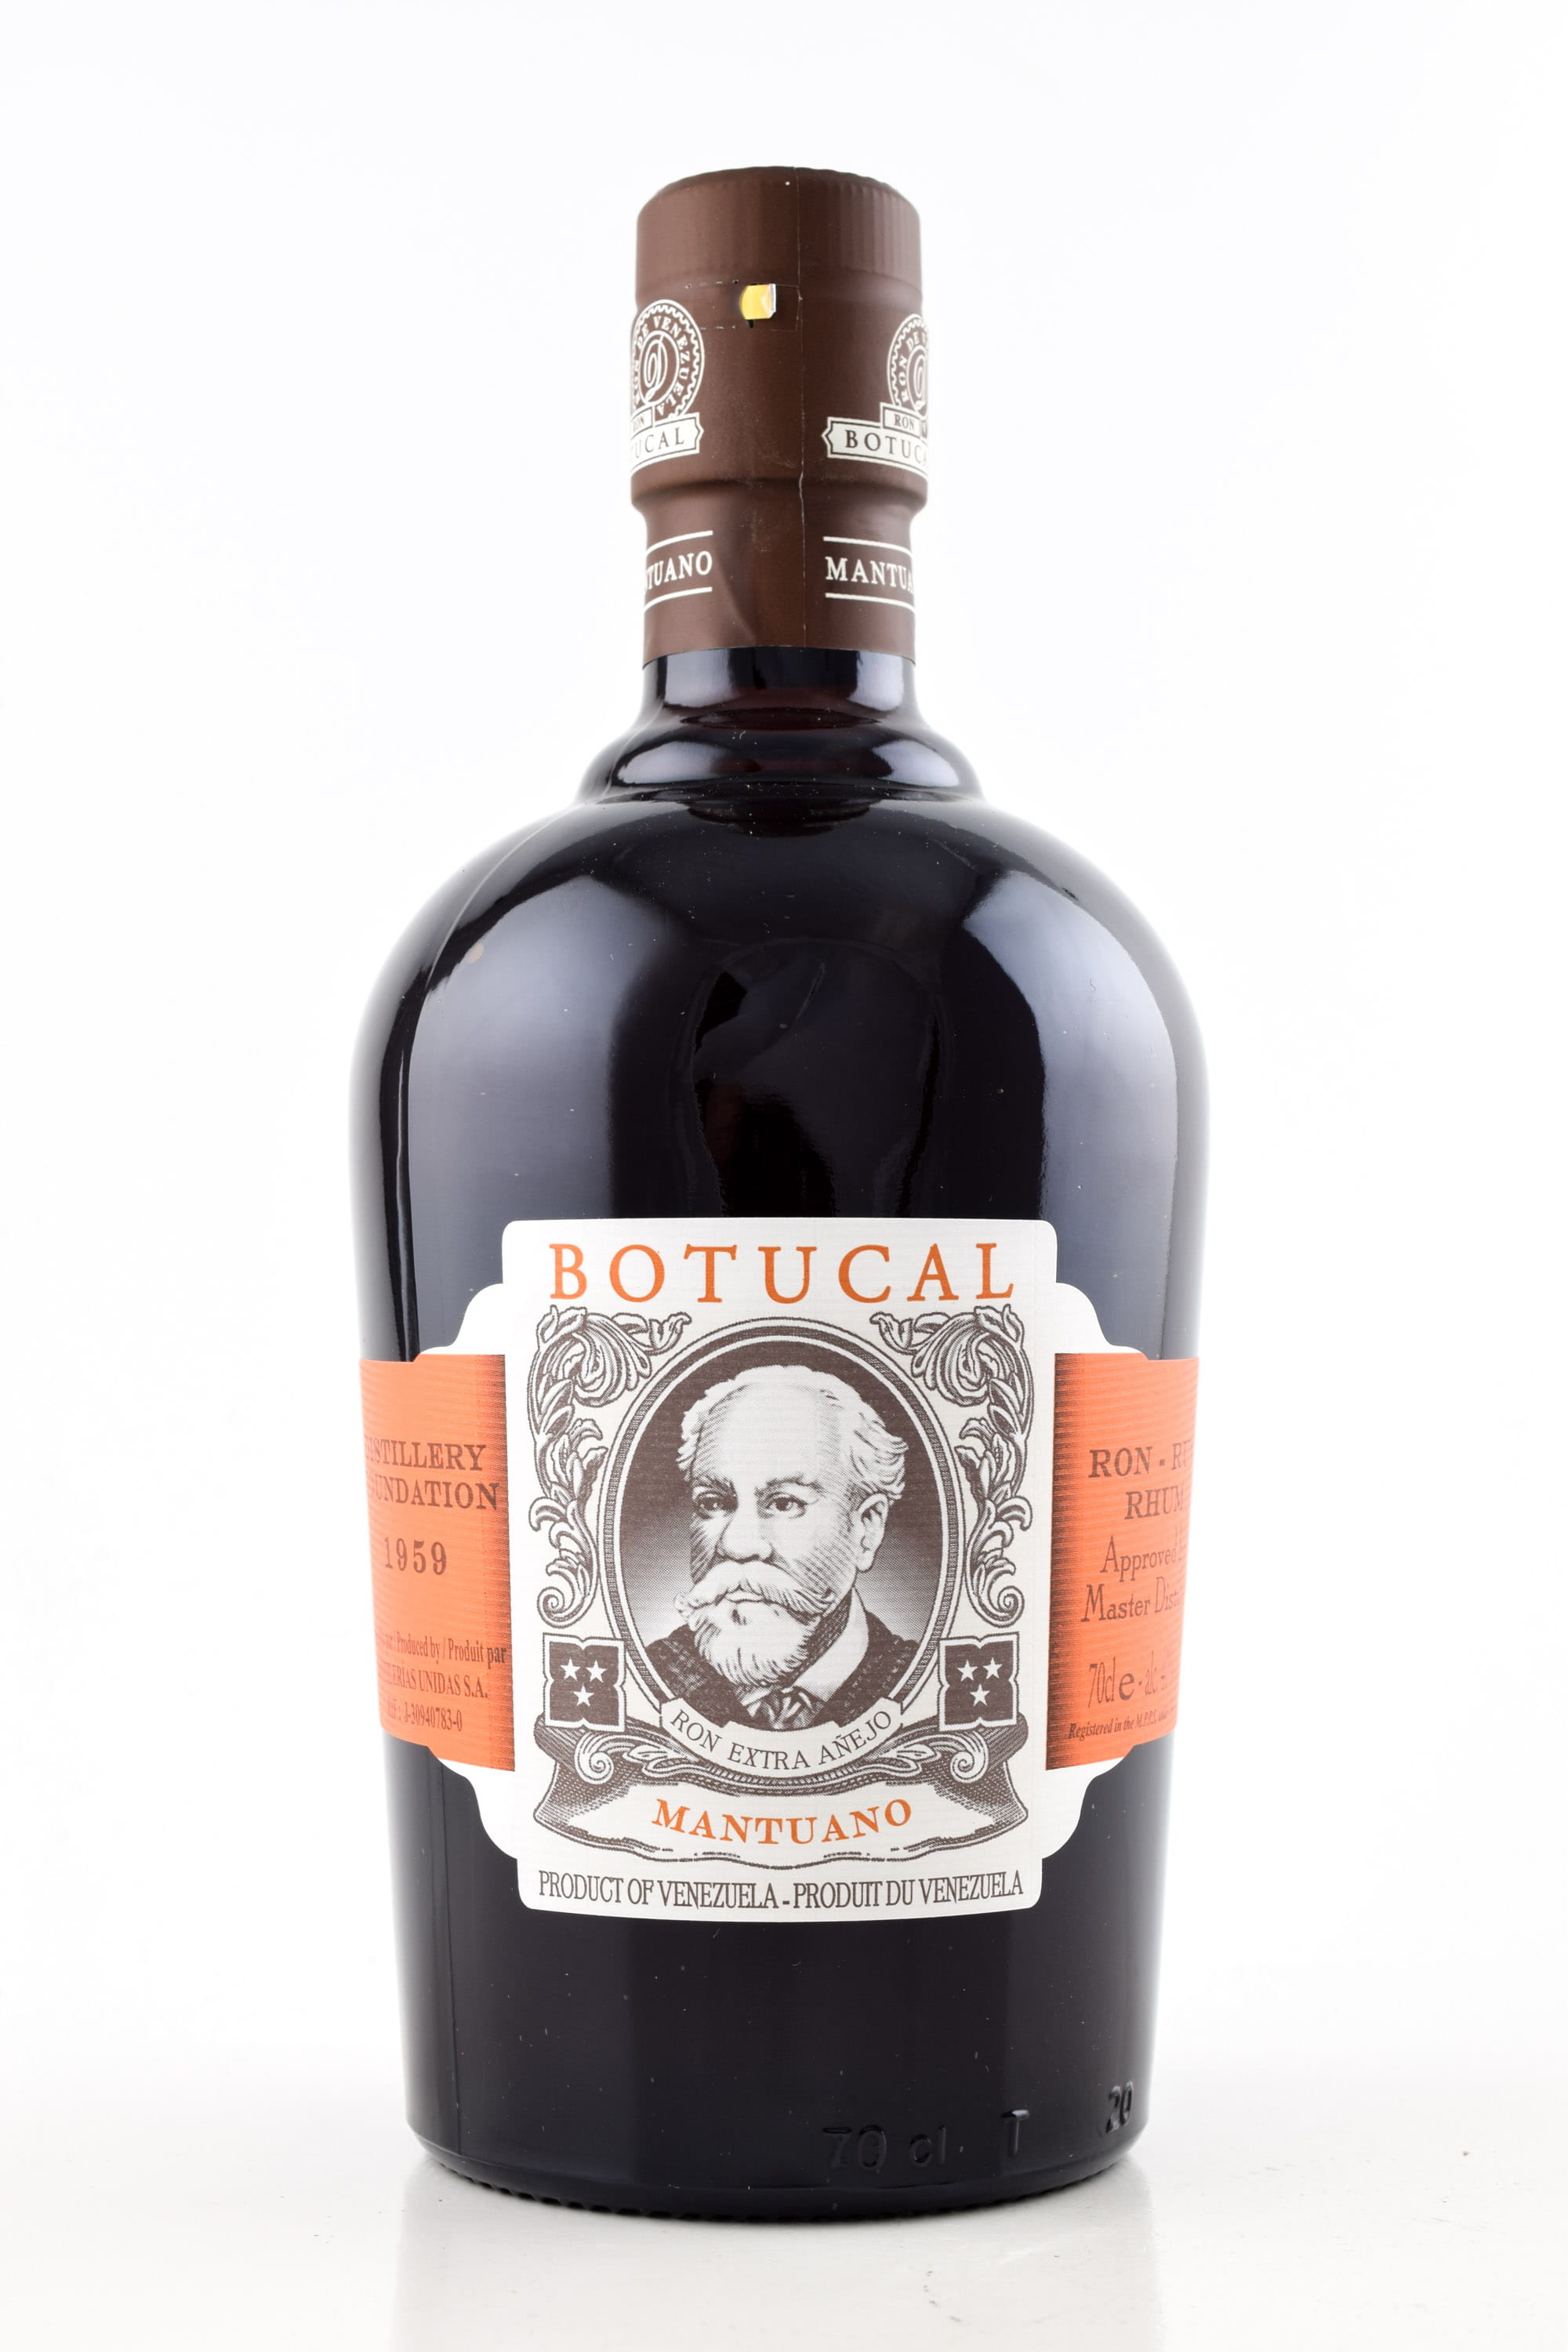 Botucal Mantuano Home of at Malts Anejo now! Home | Extra Malts explore >> of